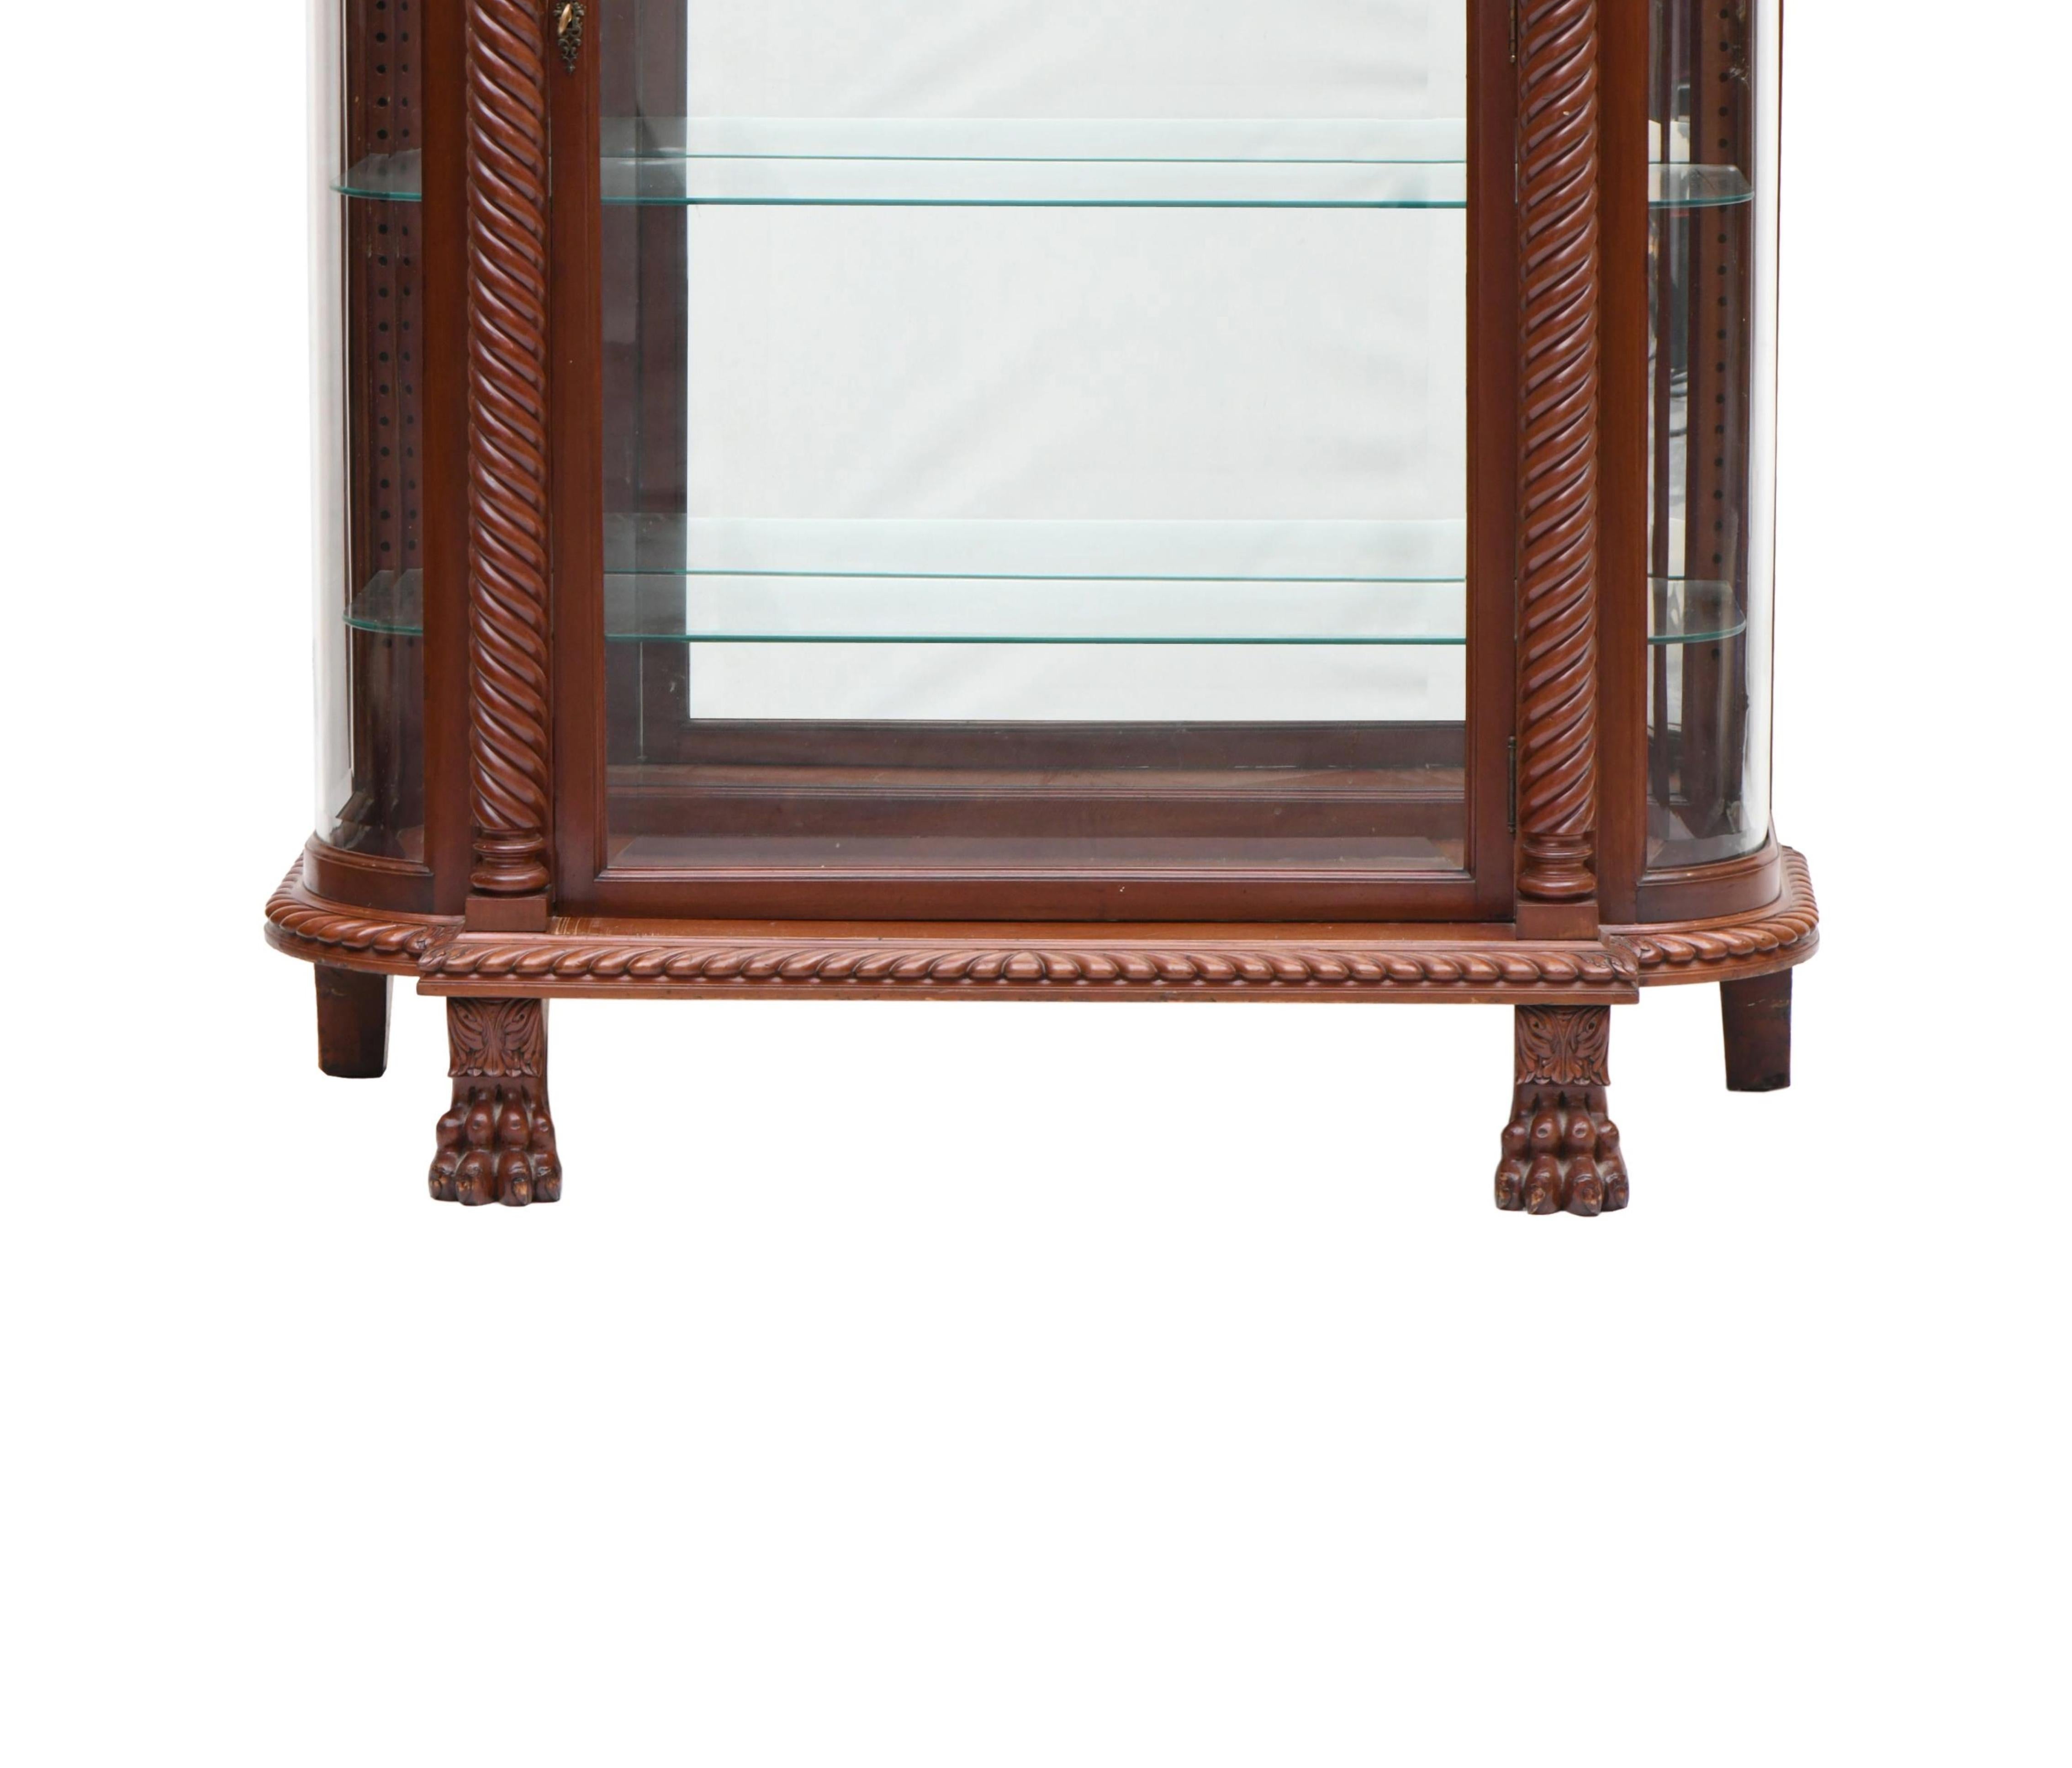 Hand-Carved Mahogany Wood Beveled Glass Mirrored Back Cabinet / Vitrine By R.J.Horner For Sale